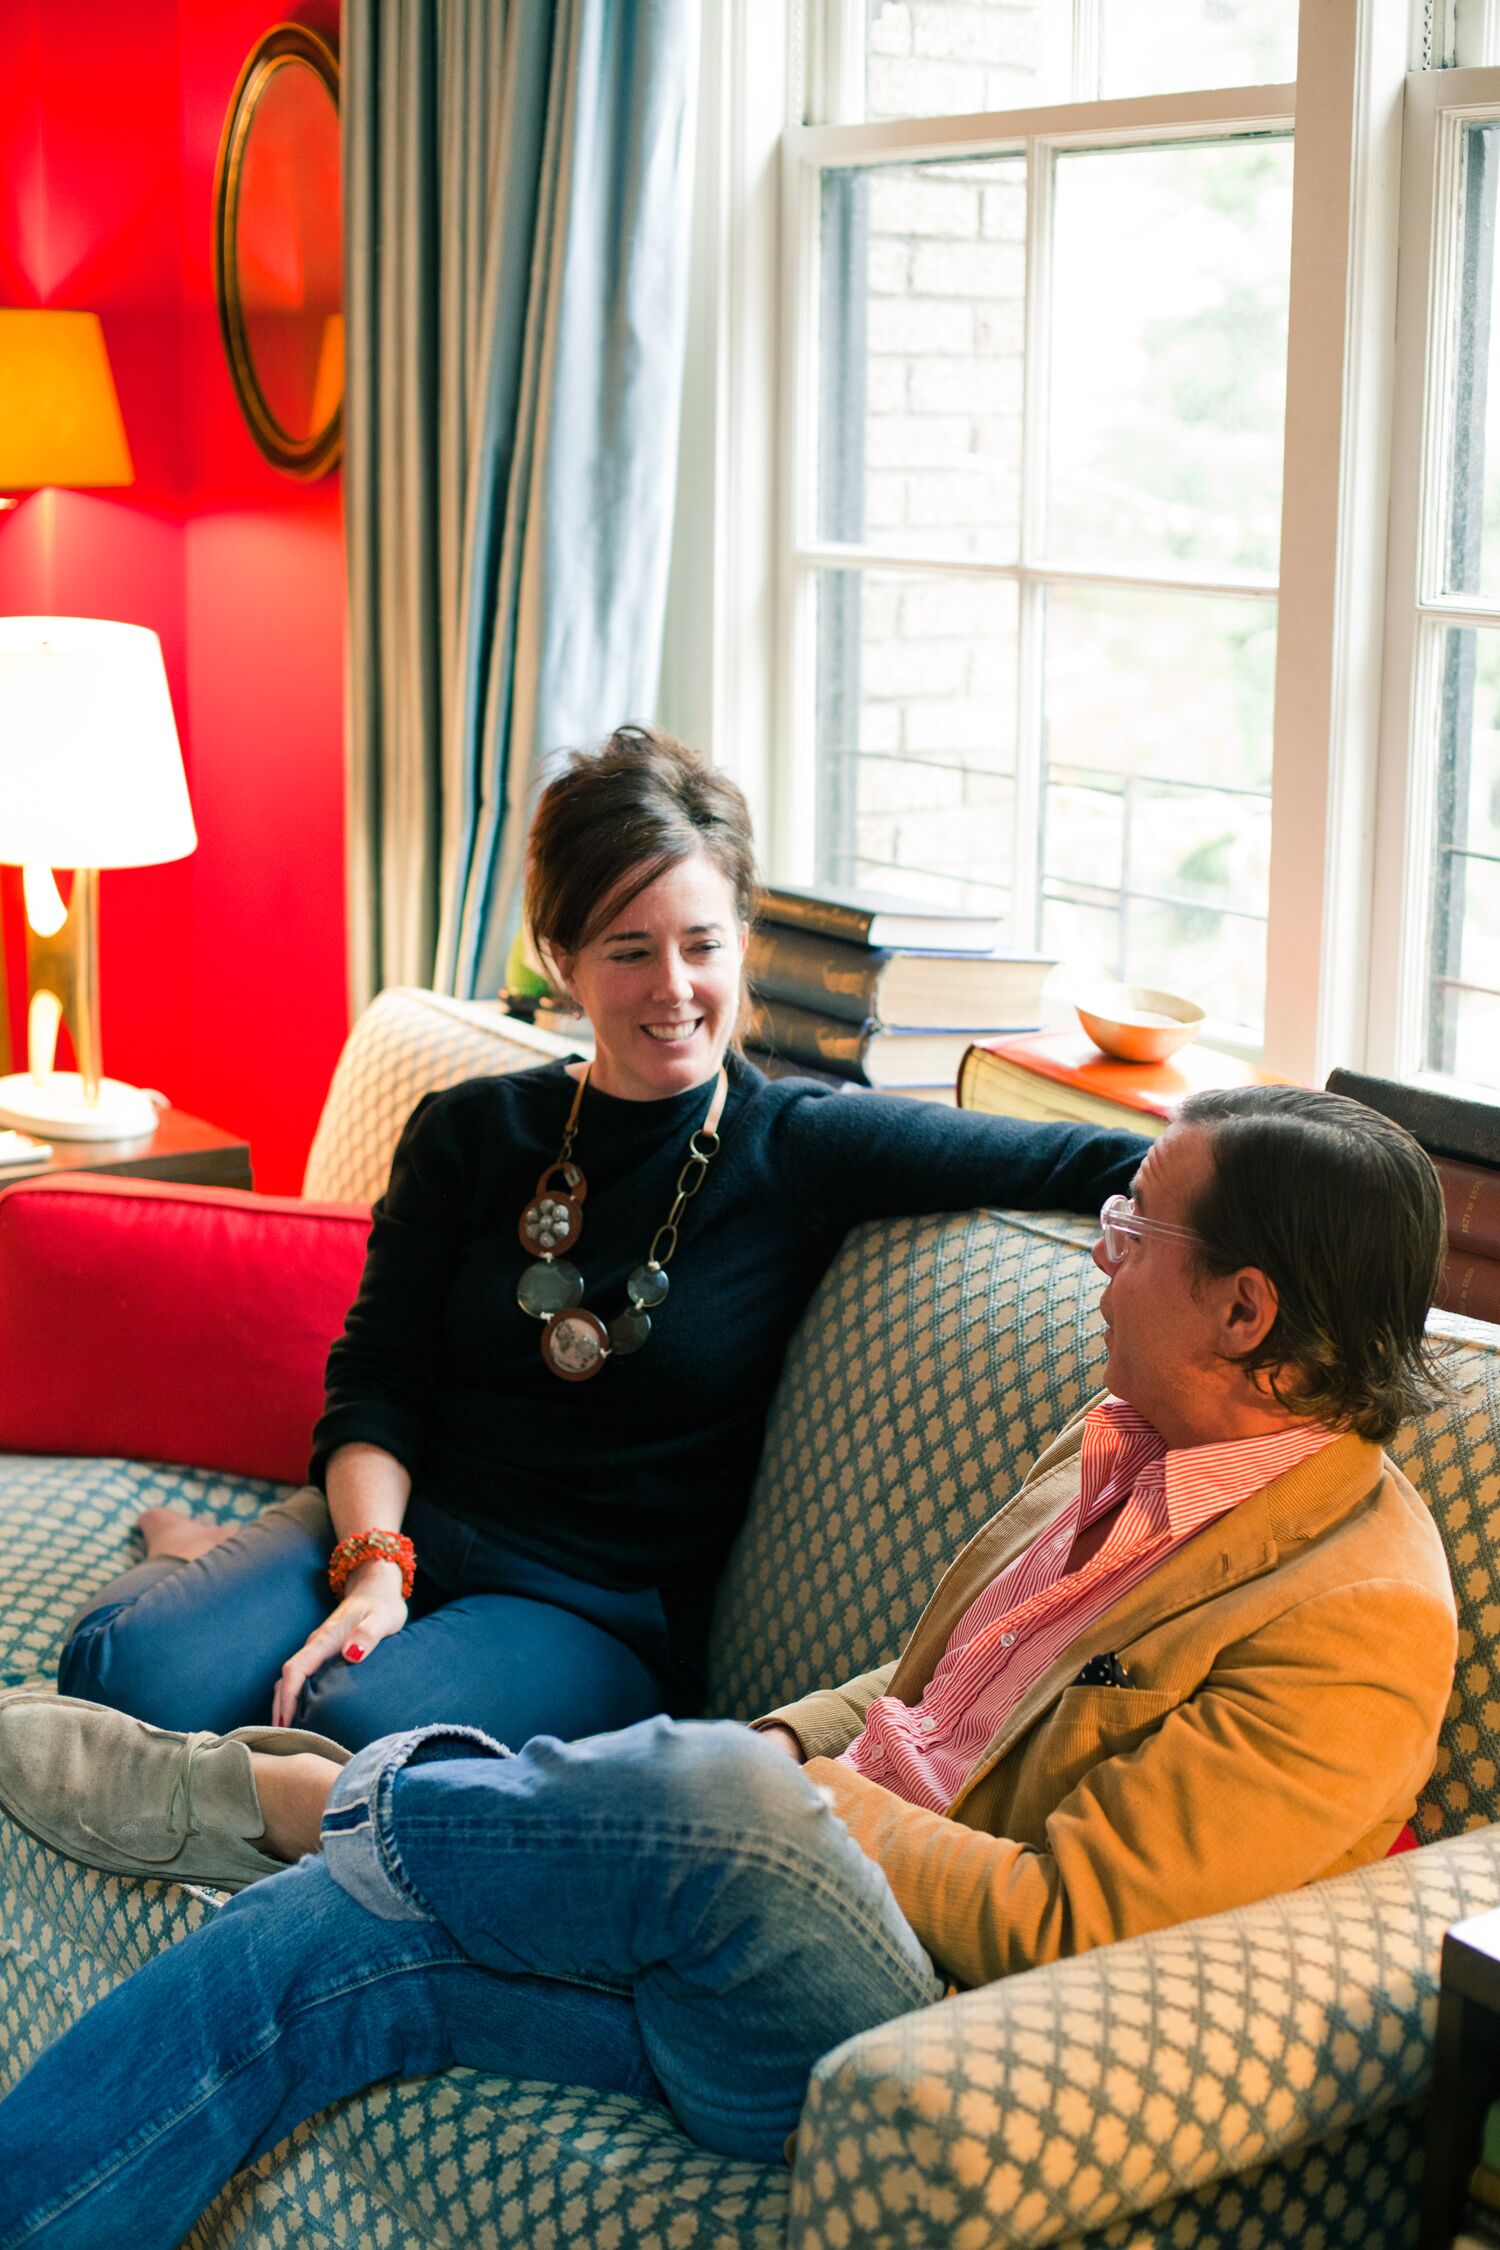 kate-andy-spade-home-new-york-city-candid-interview-apartment